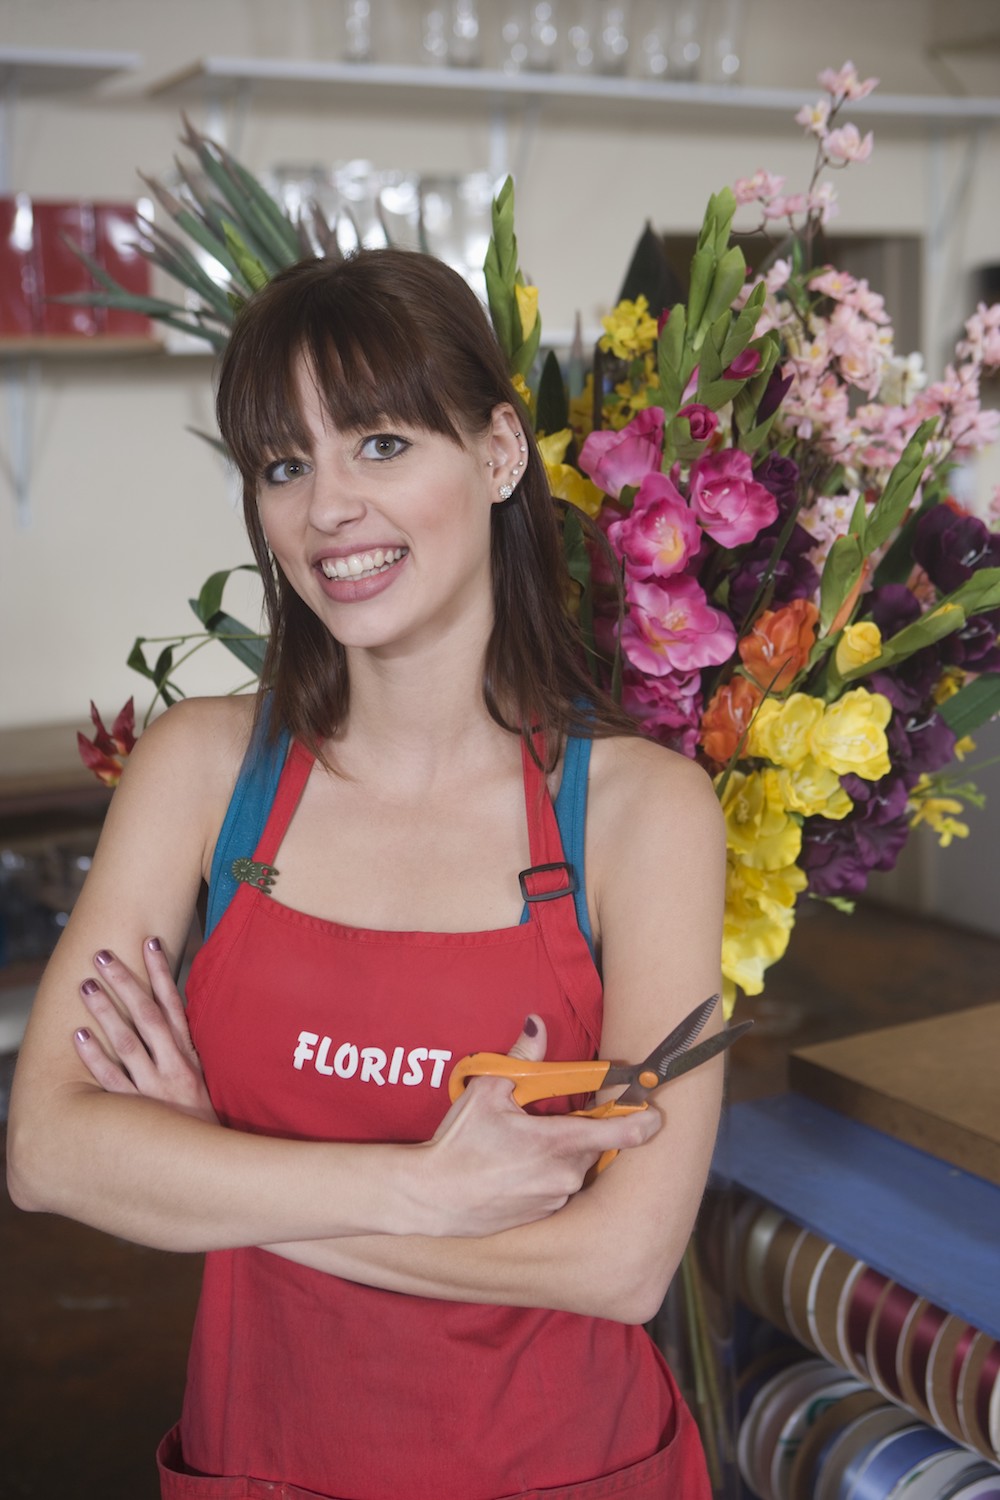 local florist seo for local businesses